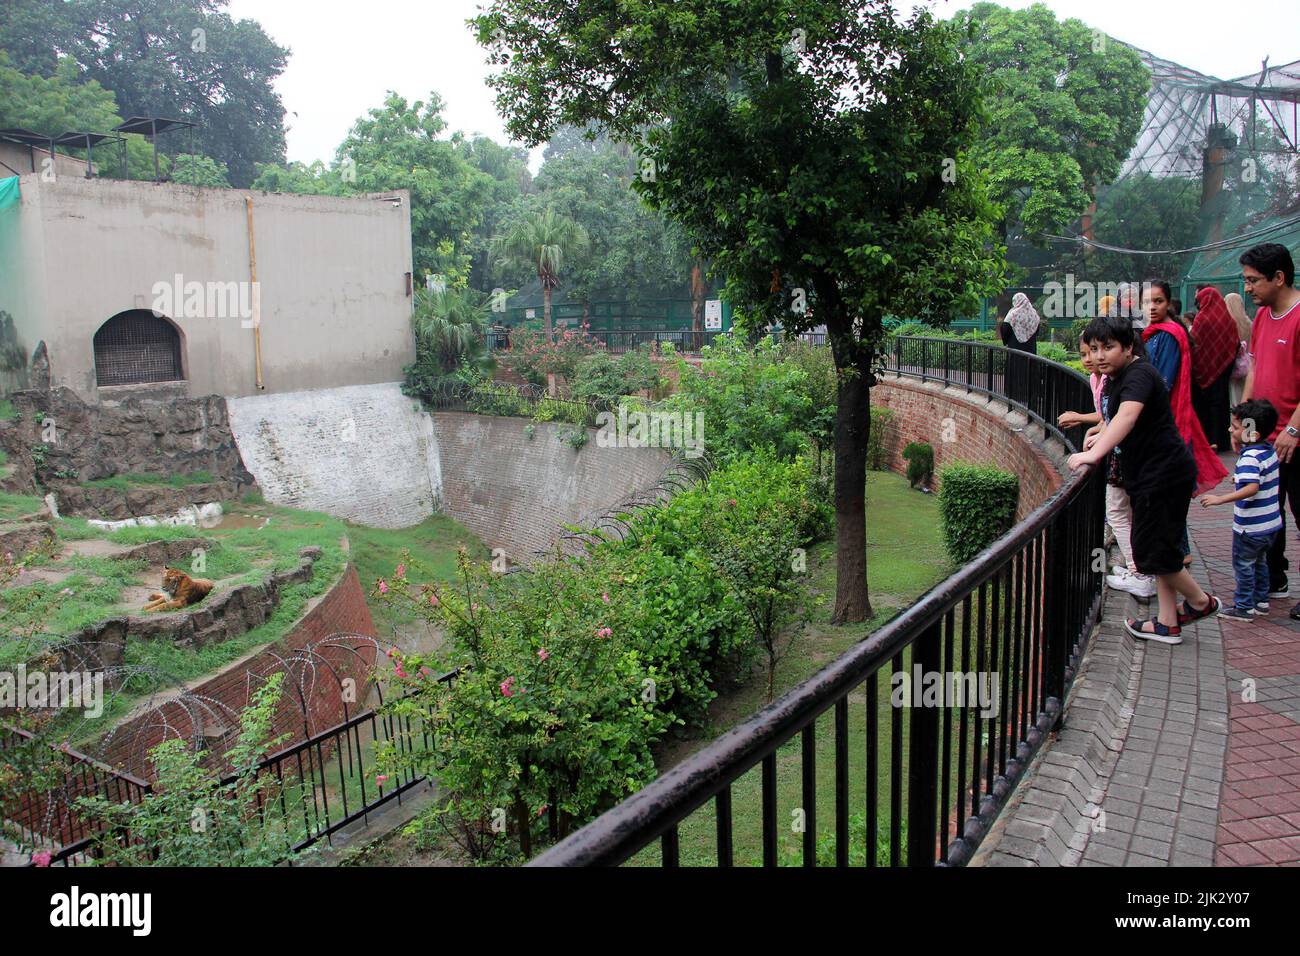 Lahore. 29th July, 2022. People visit a tiger enclosure at a zoo on International Tiger Day in Lahore, Pakistan on July 29, 2022. Credit: Jamil Ahmed/Xinhua/Alamy Live News Stock Photo